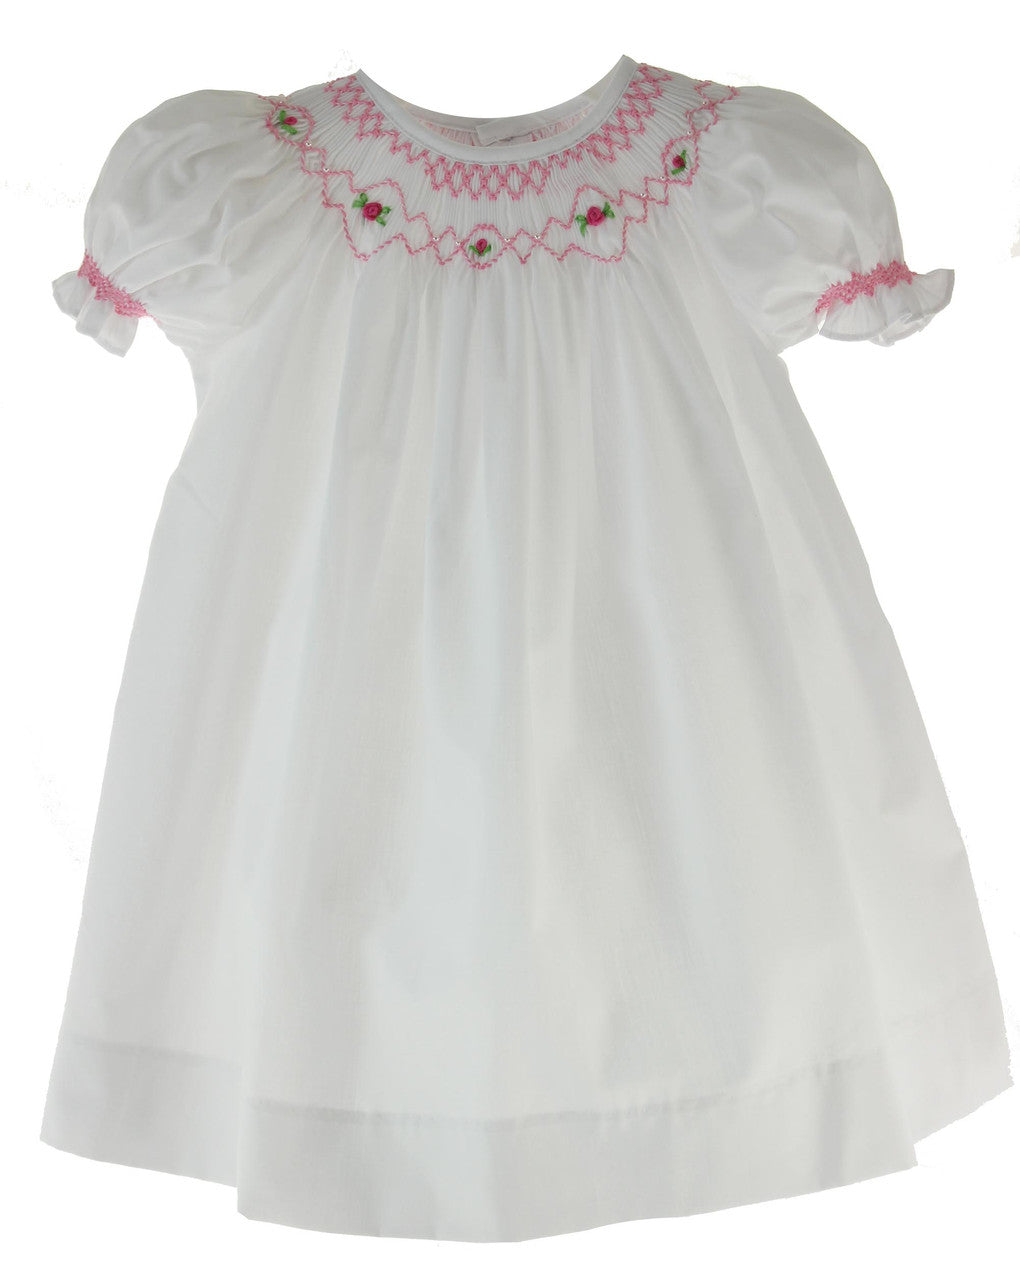 Baby Girl 3 Pieces Set Christening Birthday Lace Satin Gown Dress Cape  0-24month | eBay